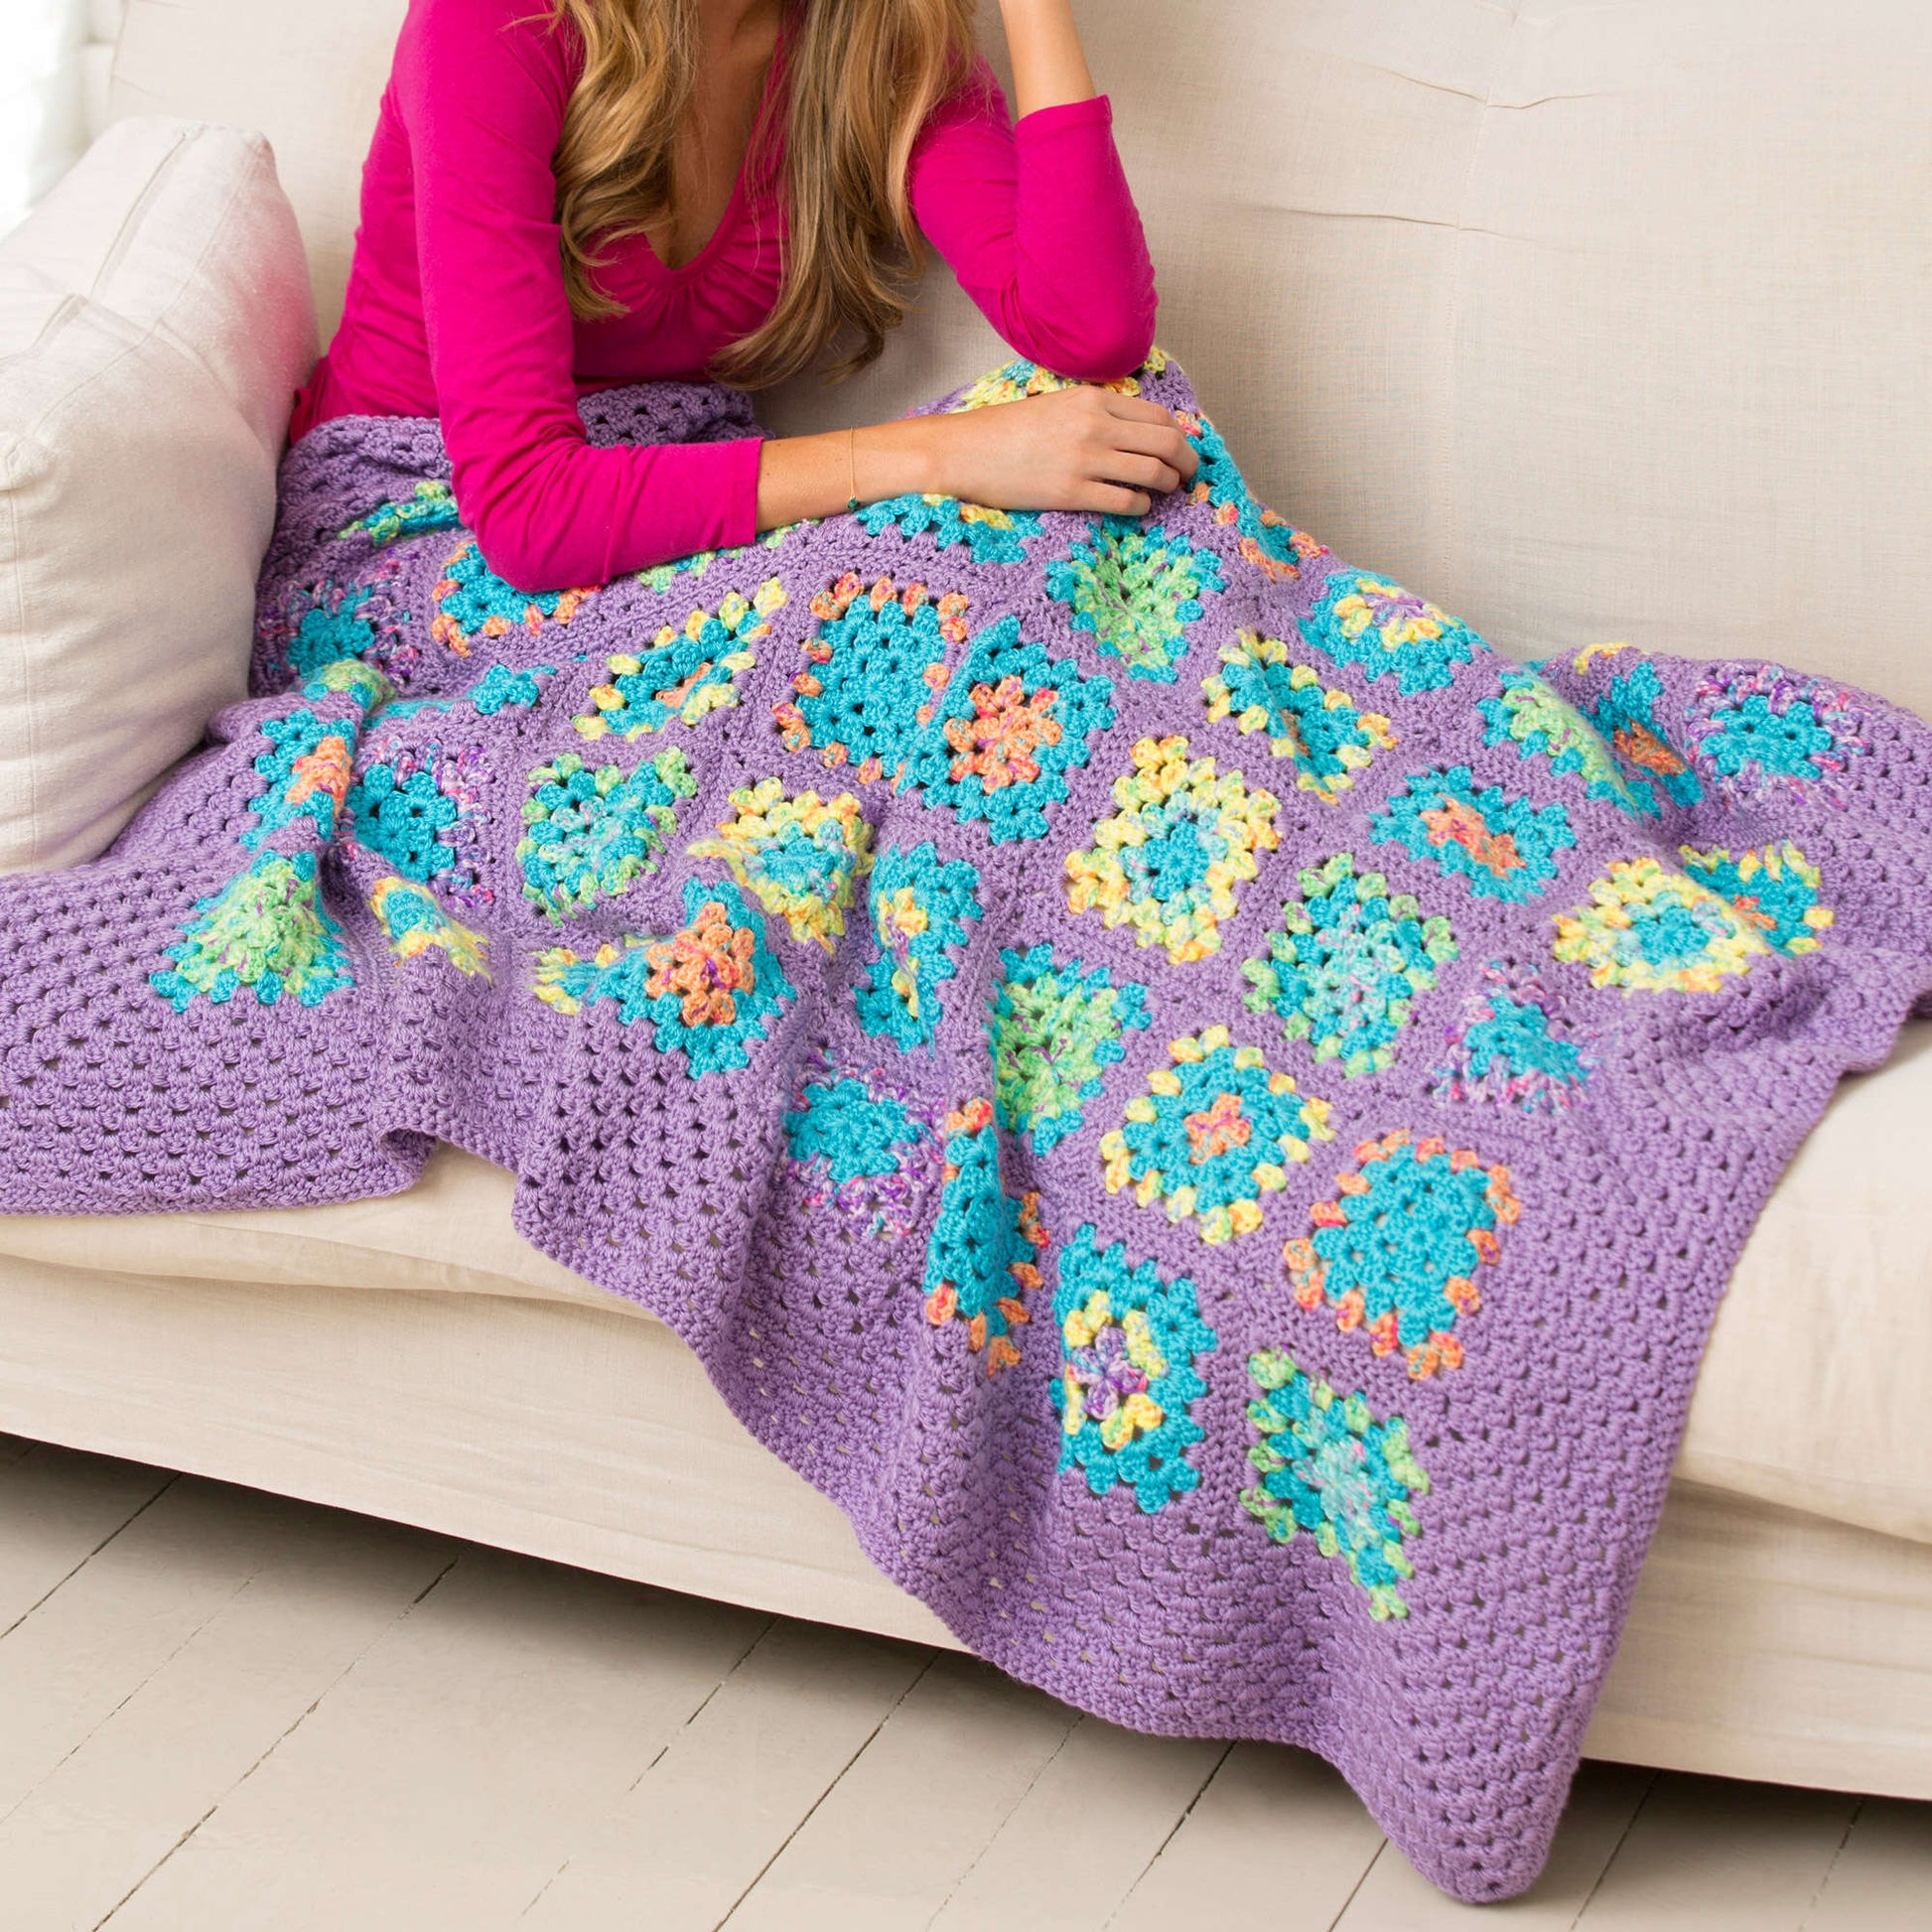 Free Red Heart Crochet Cheerful Granny Square Throw Pattern